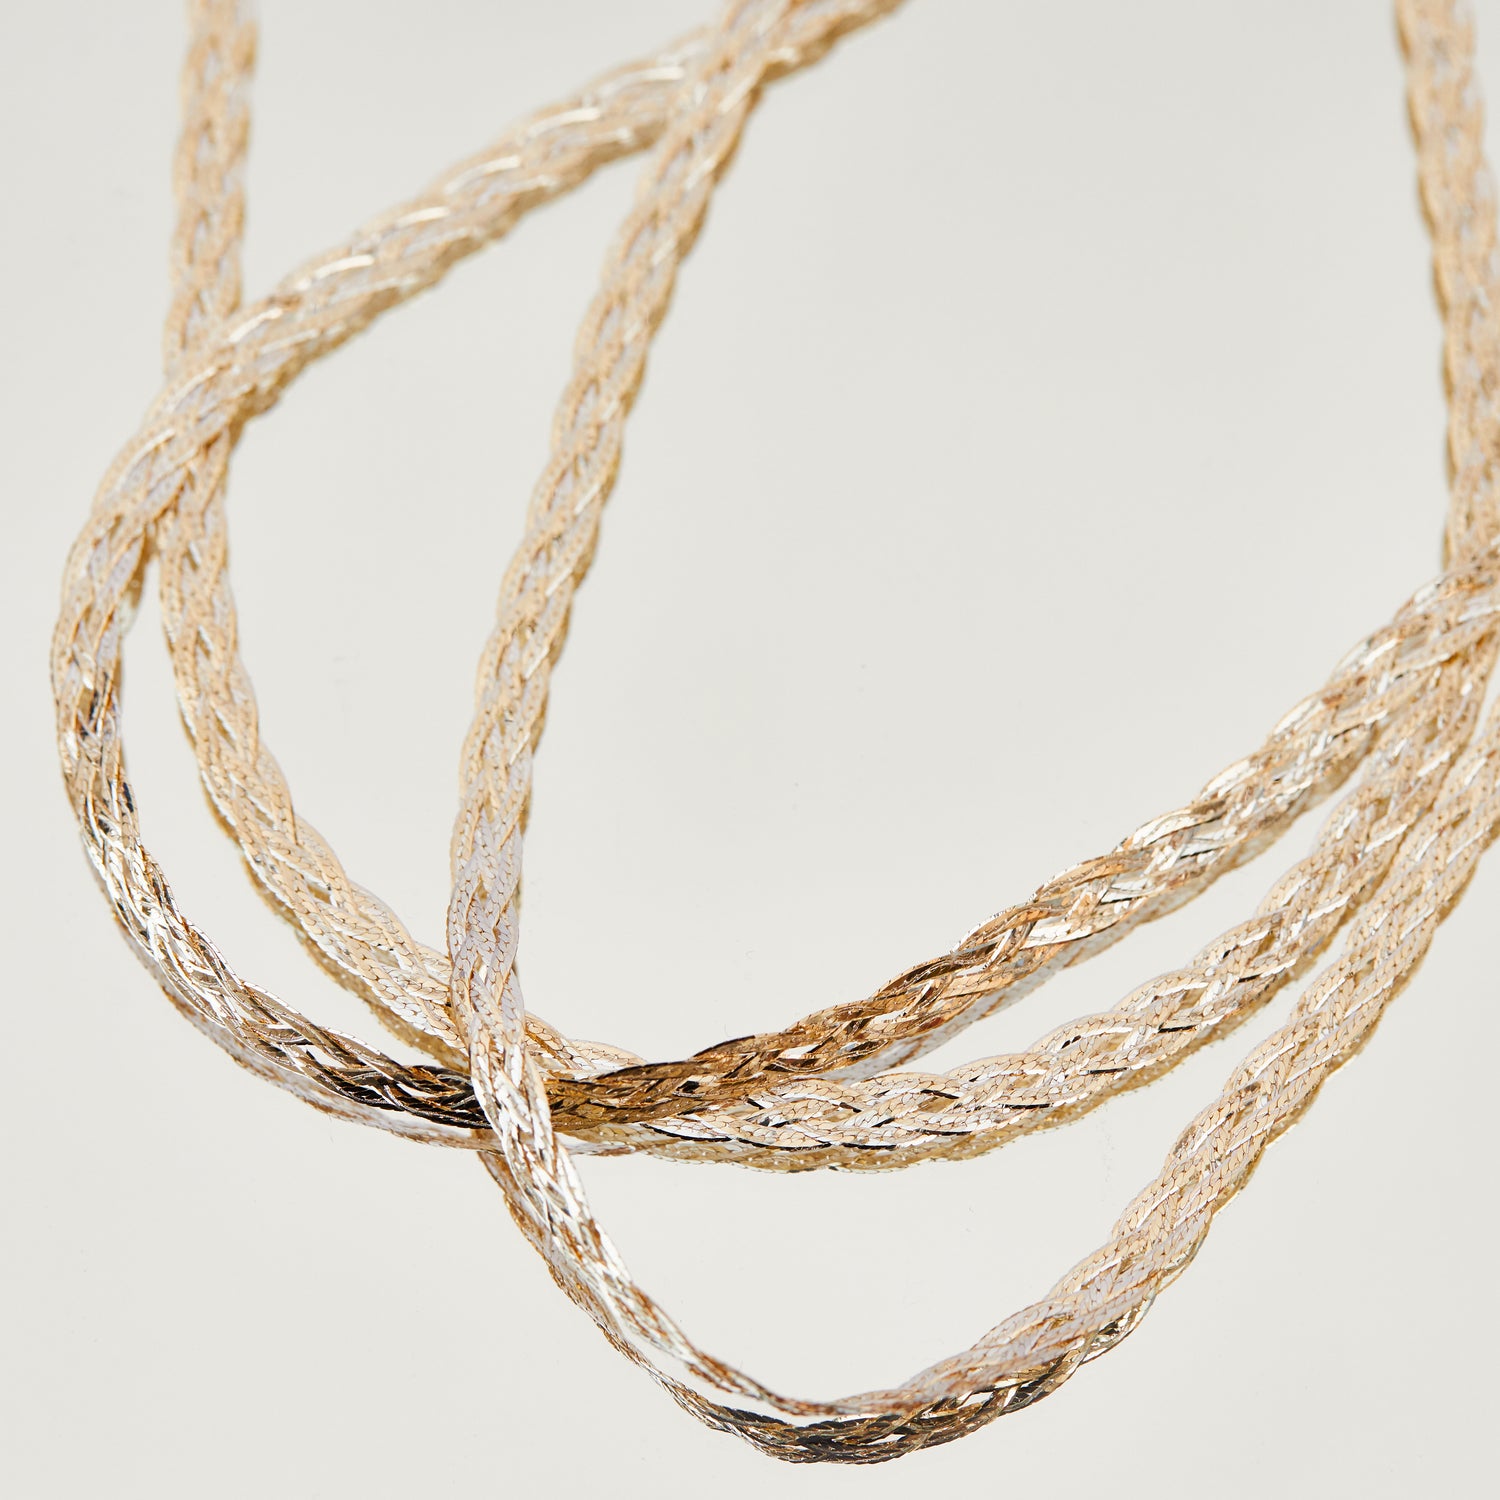 Diamond Cut Braid Chain Necklace in 9k Solid Yellow Gold - Necklace - Carrie Elizabeth